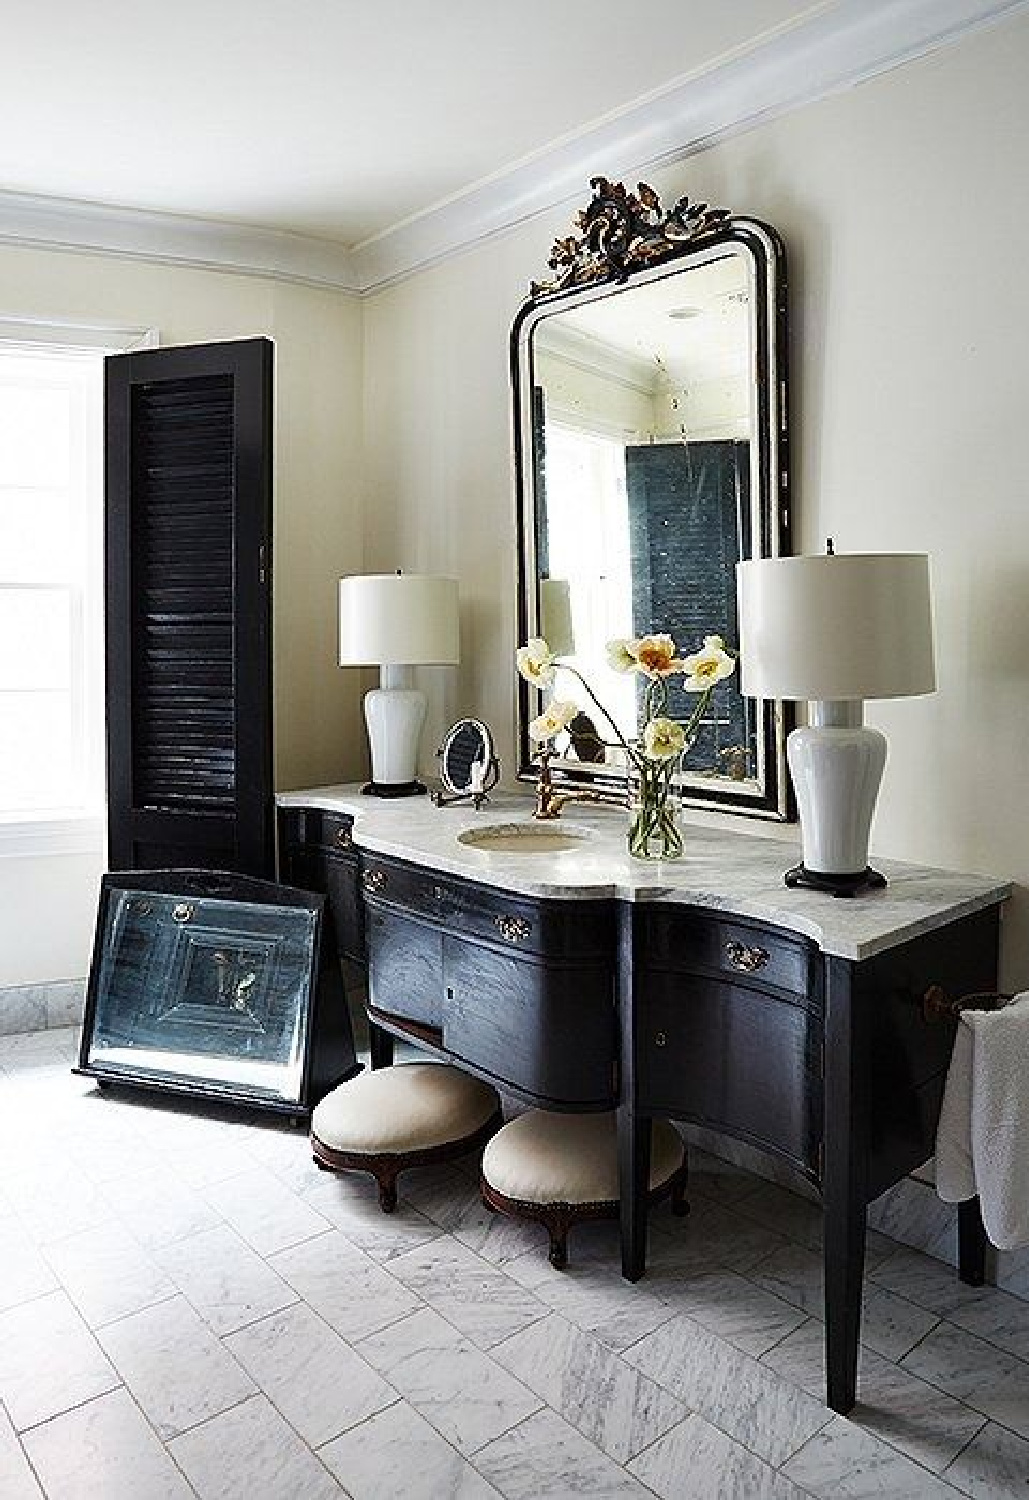 Darryl Carter, known for for his refined eye for antiques, filled his master bath with finds carefully cultivated over years and years of frequenting flea markets and vintage shops.